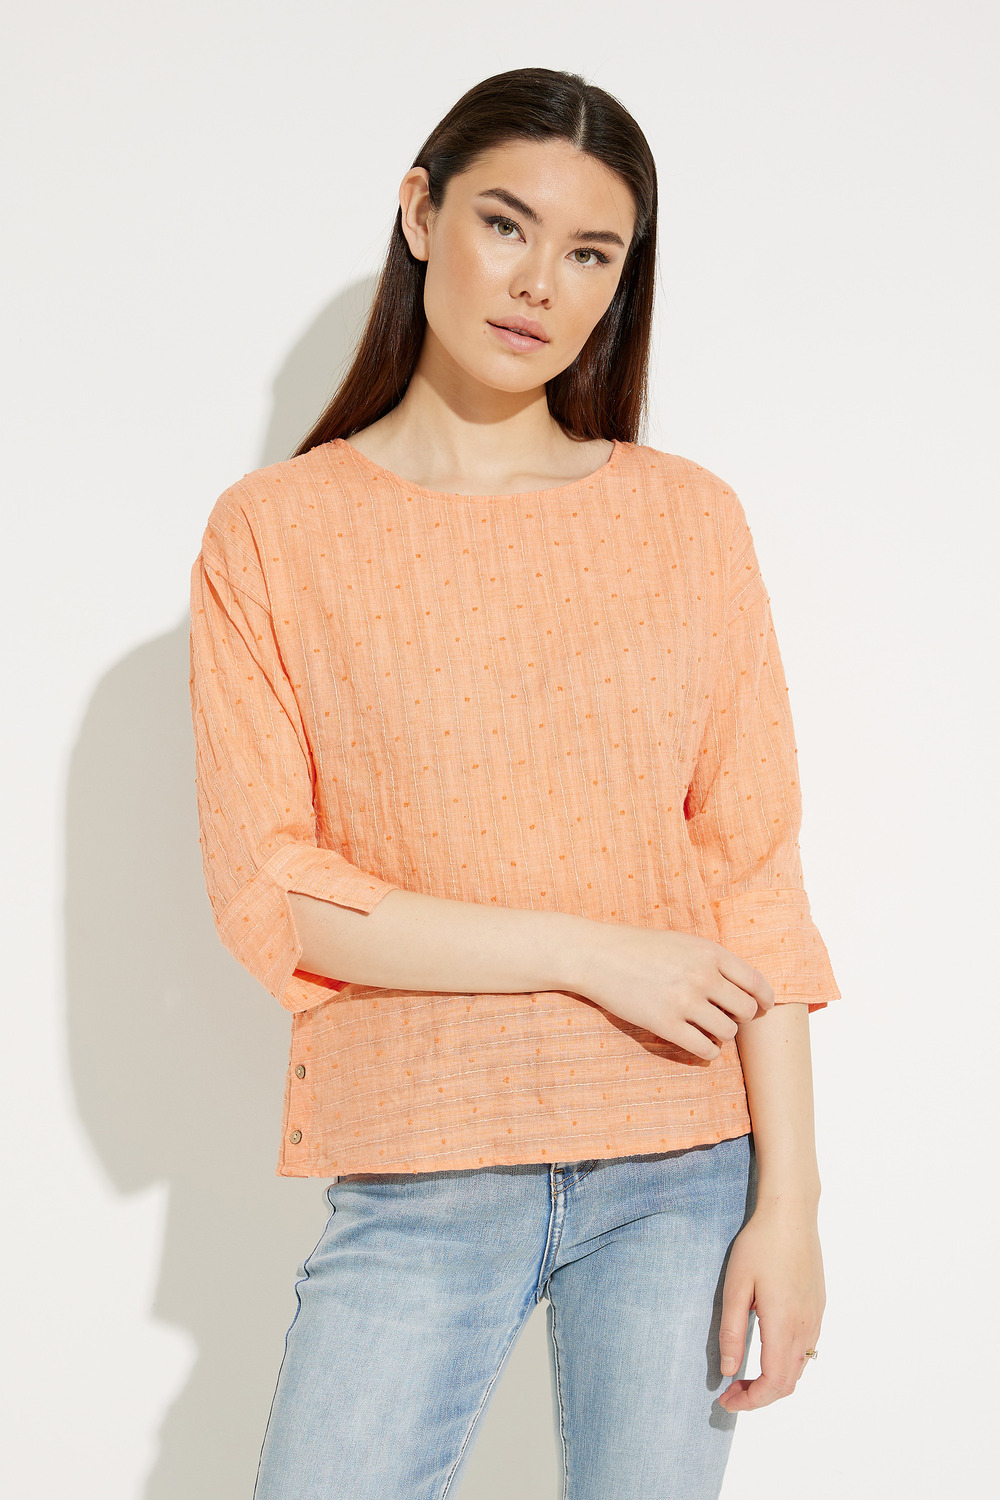 Textured Boat Neck Blouse Style A41095. Orange